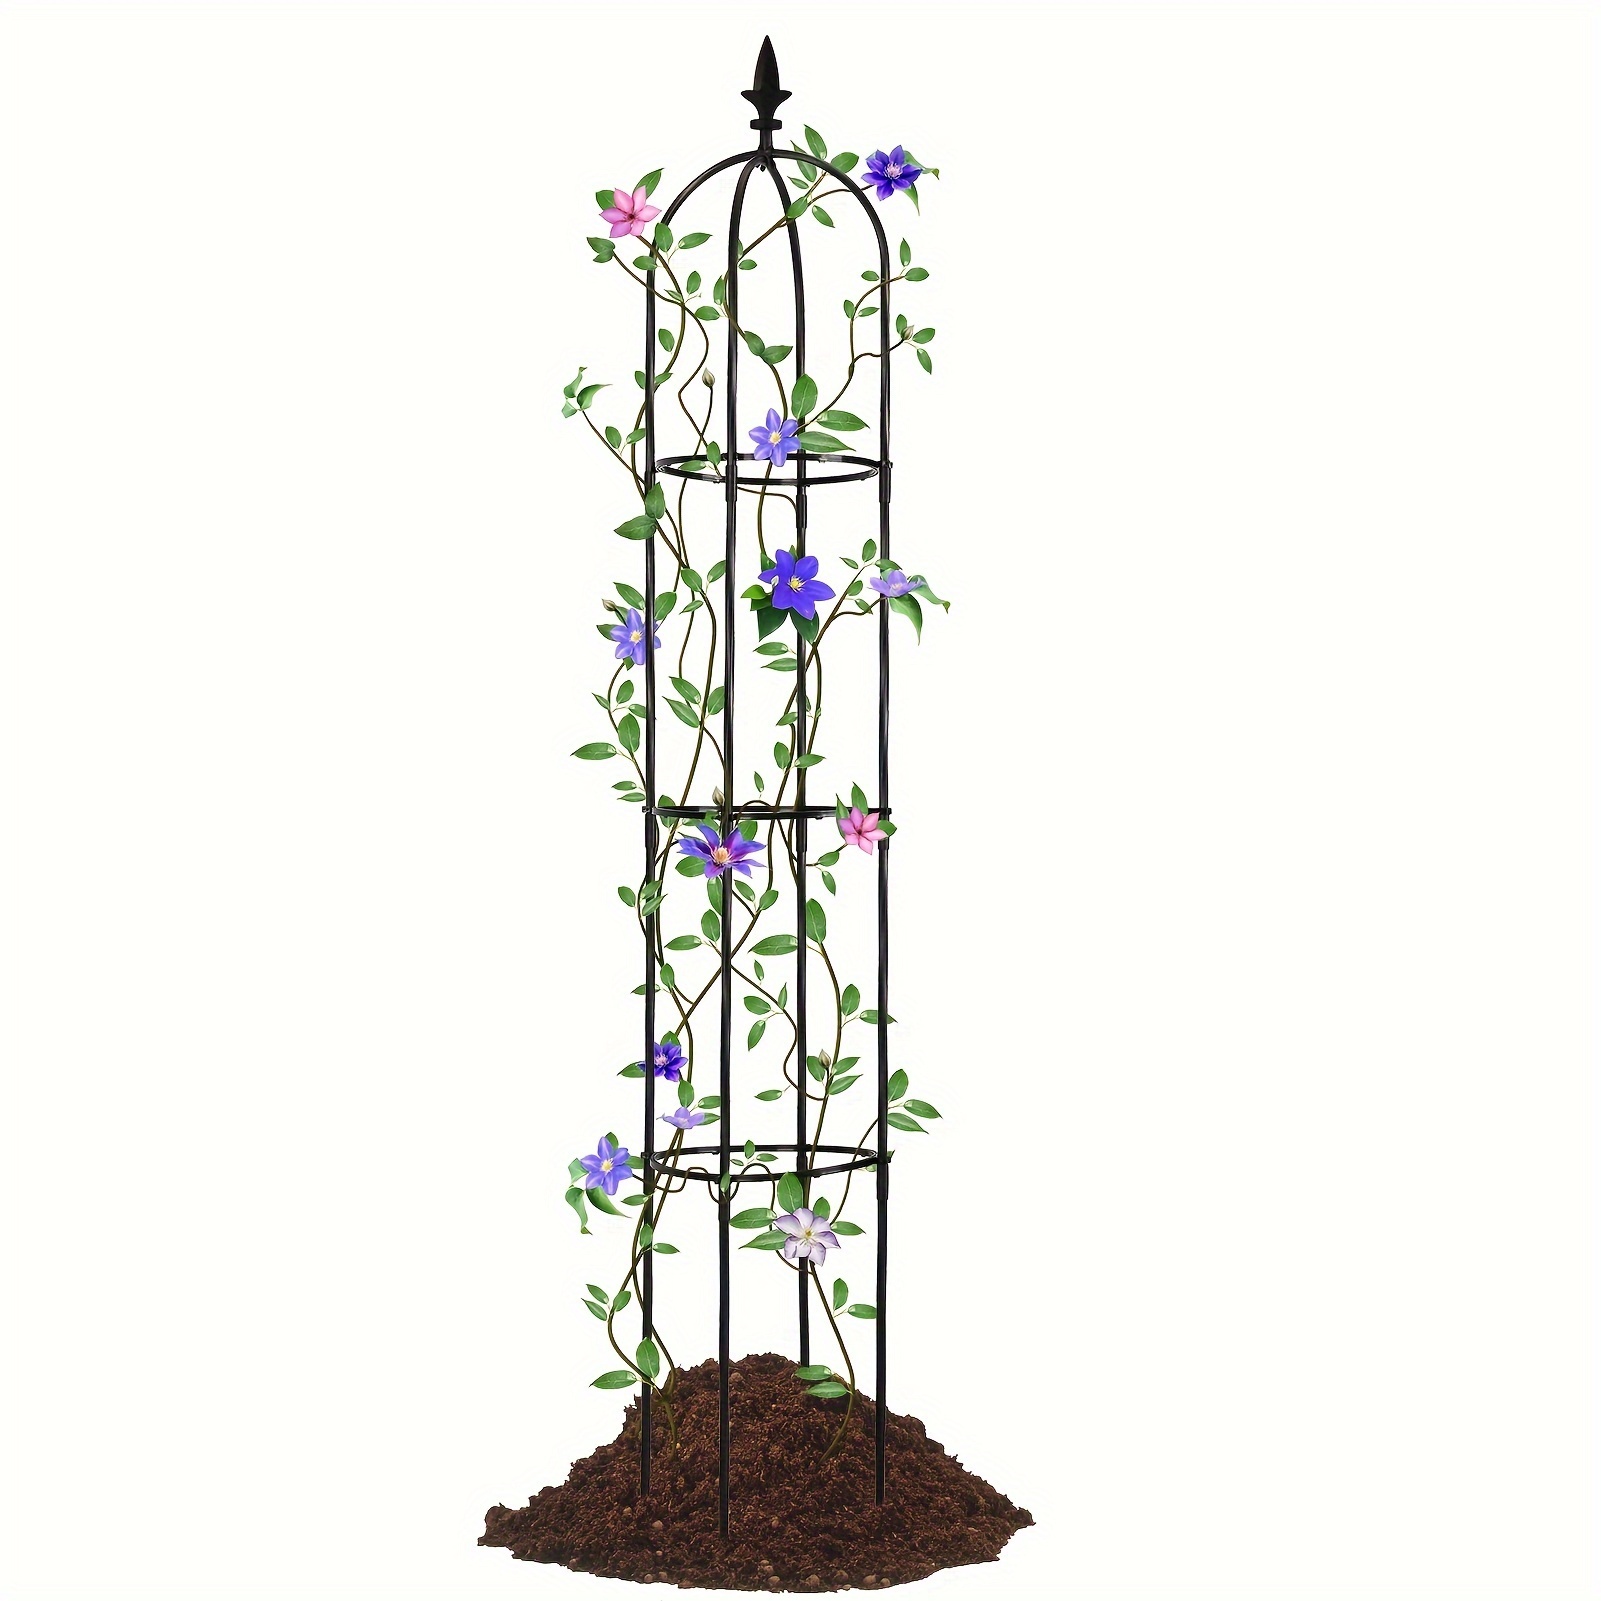 

1 Pcs Garden Obelisk Trellis For Climbing Plants Outdoors, 67 Inch Rustproof Plant Stand Climbing Support With Adjustable Heights For Indoor Potted Plants, Vines, Flowers Stands, Vegetables